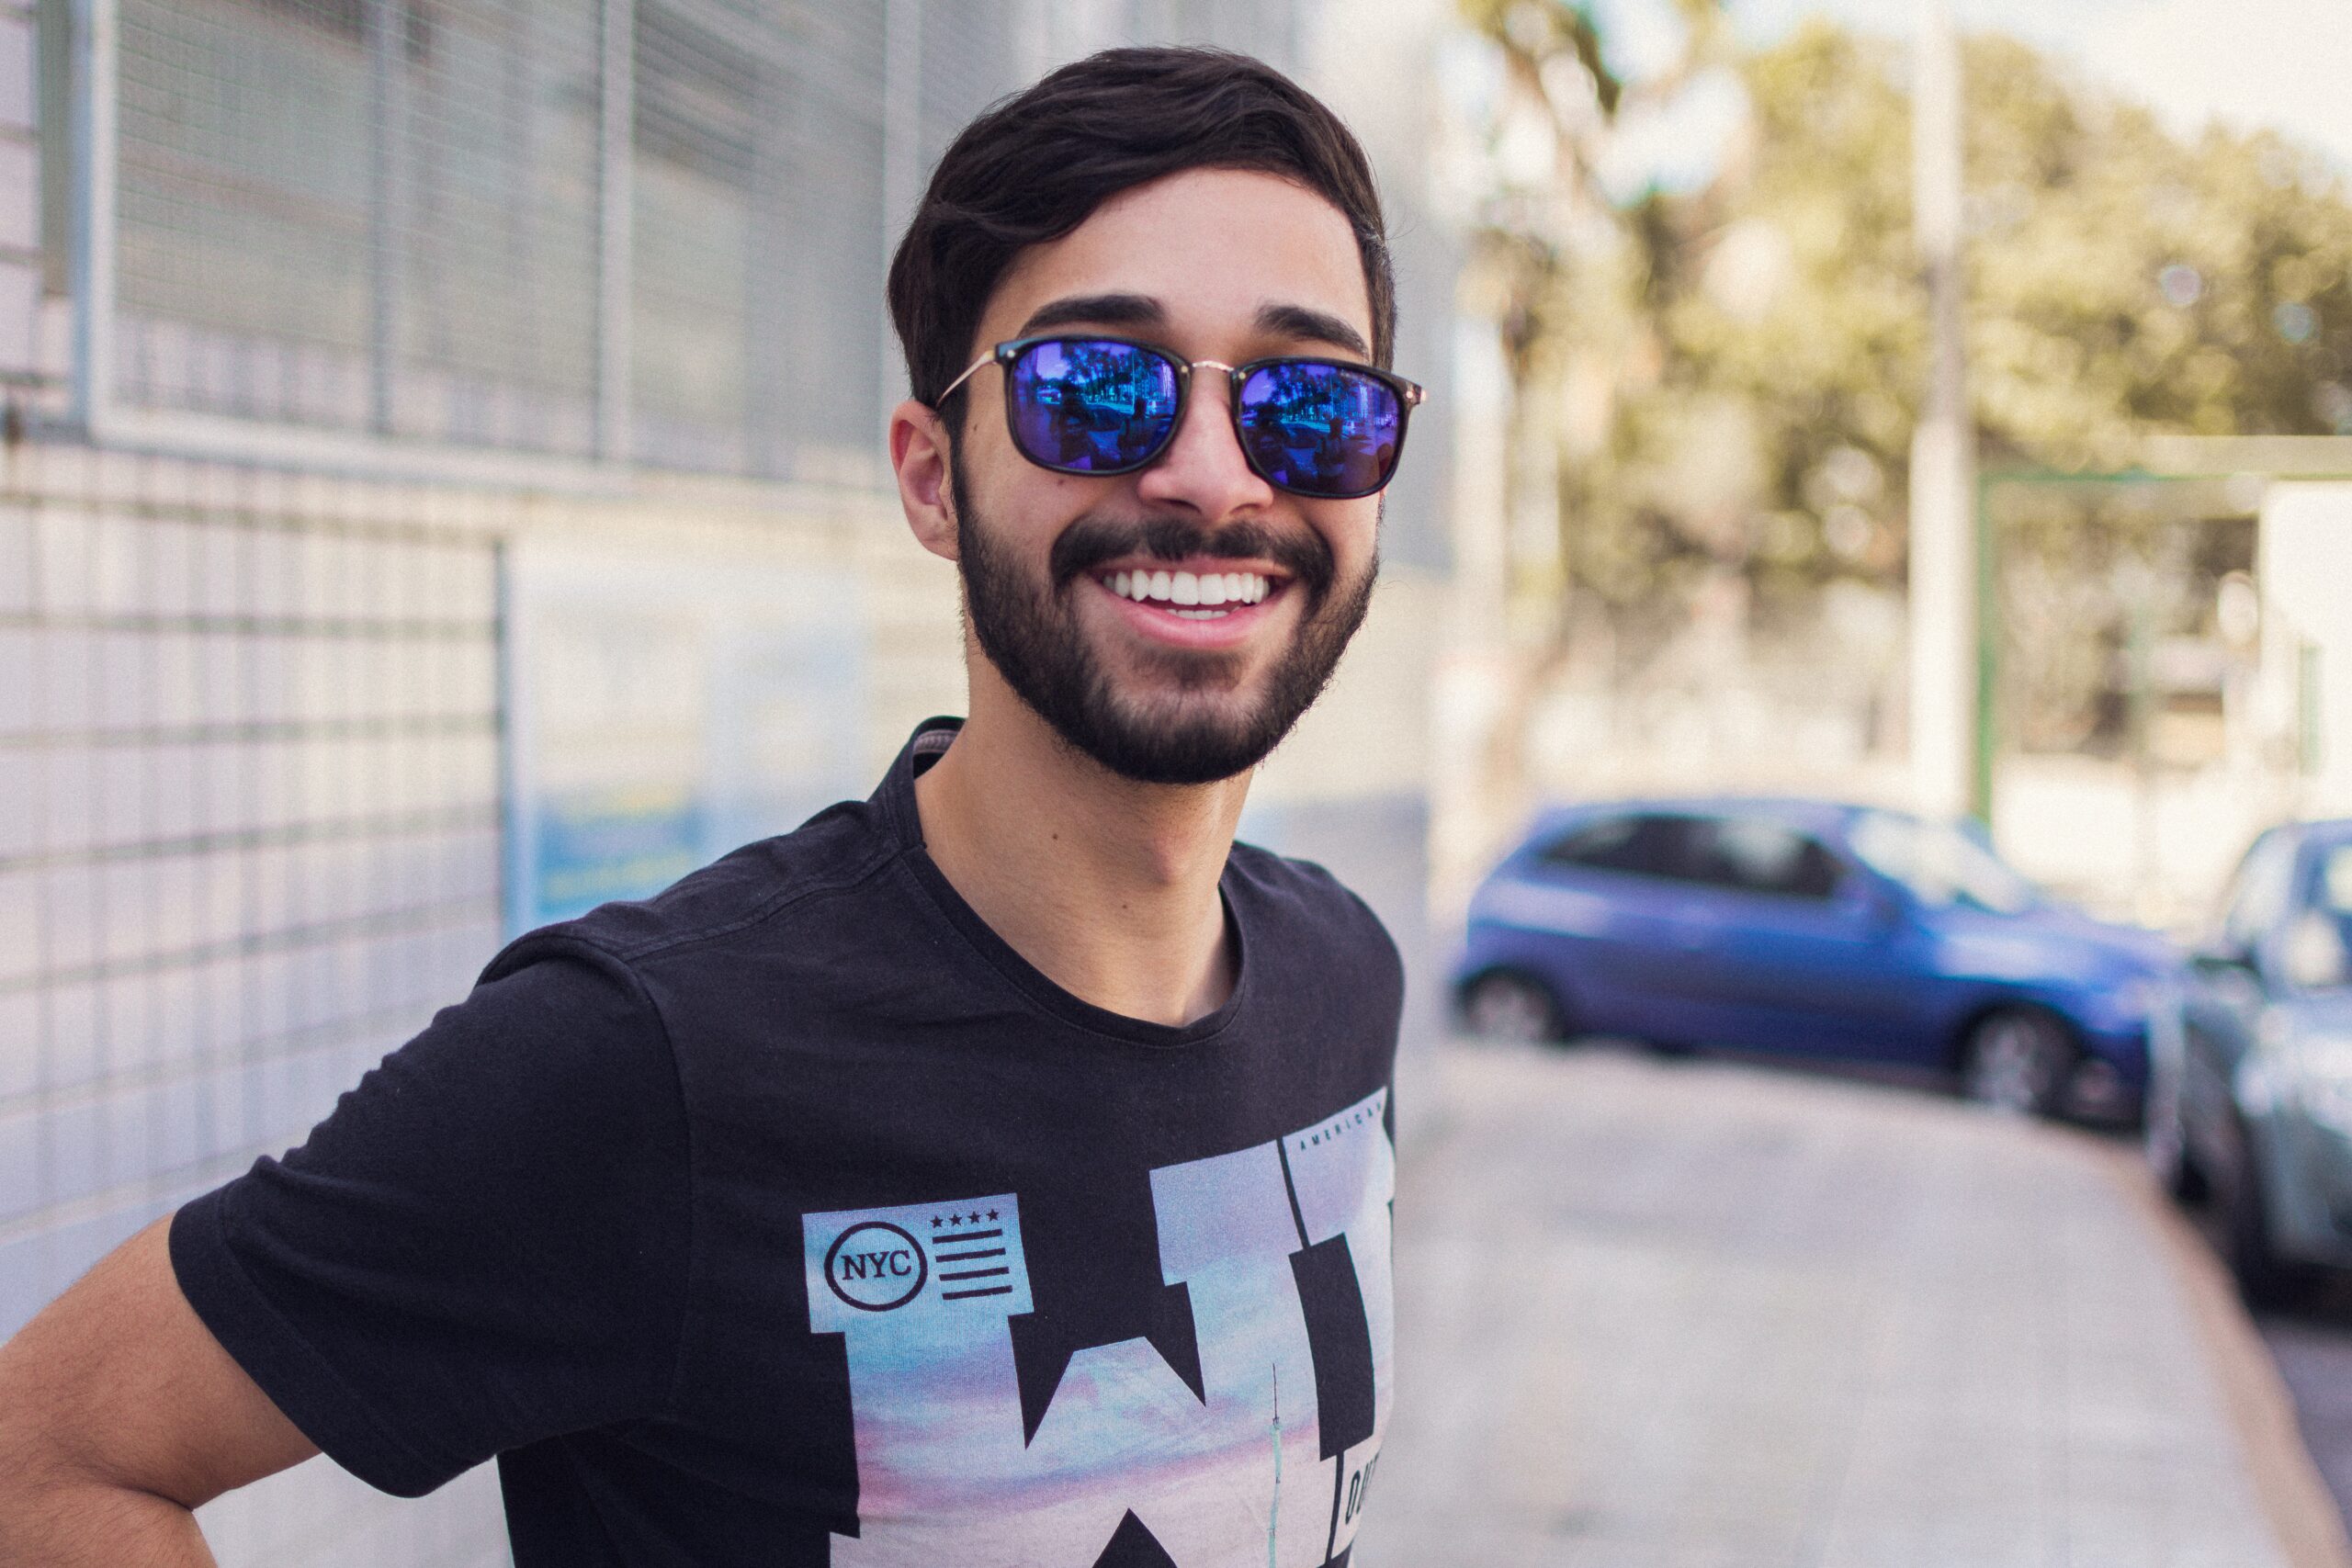 Young man with sunglasses, smiling on a nice day in the city, outside.